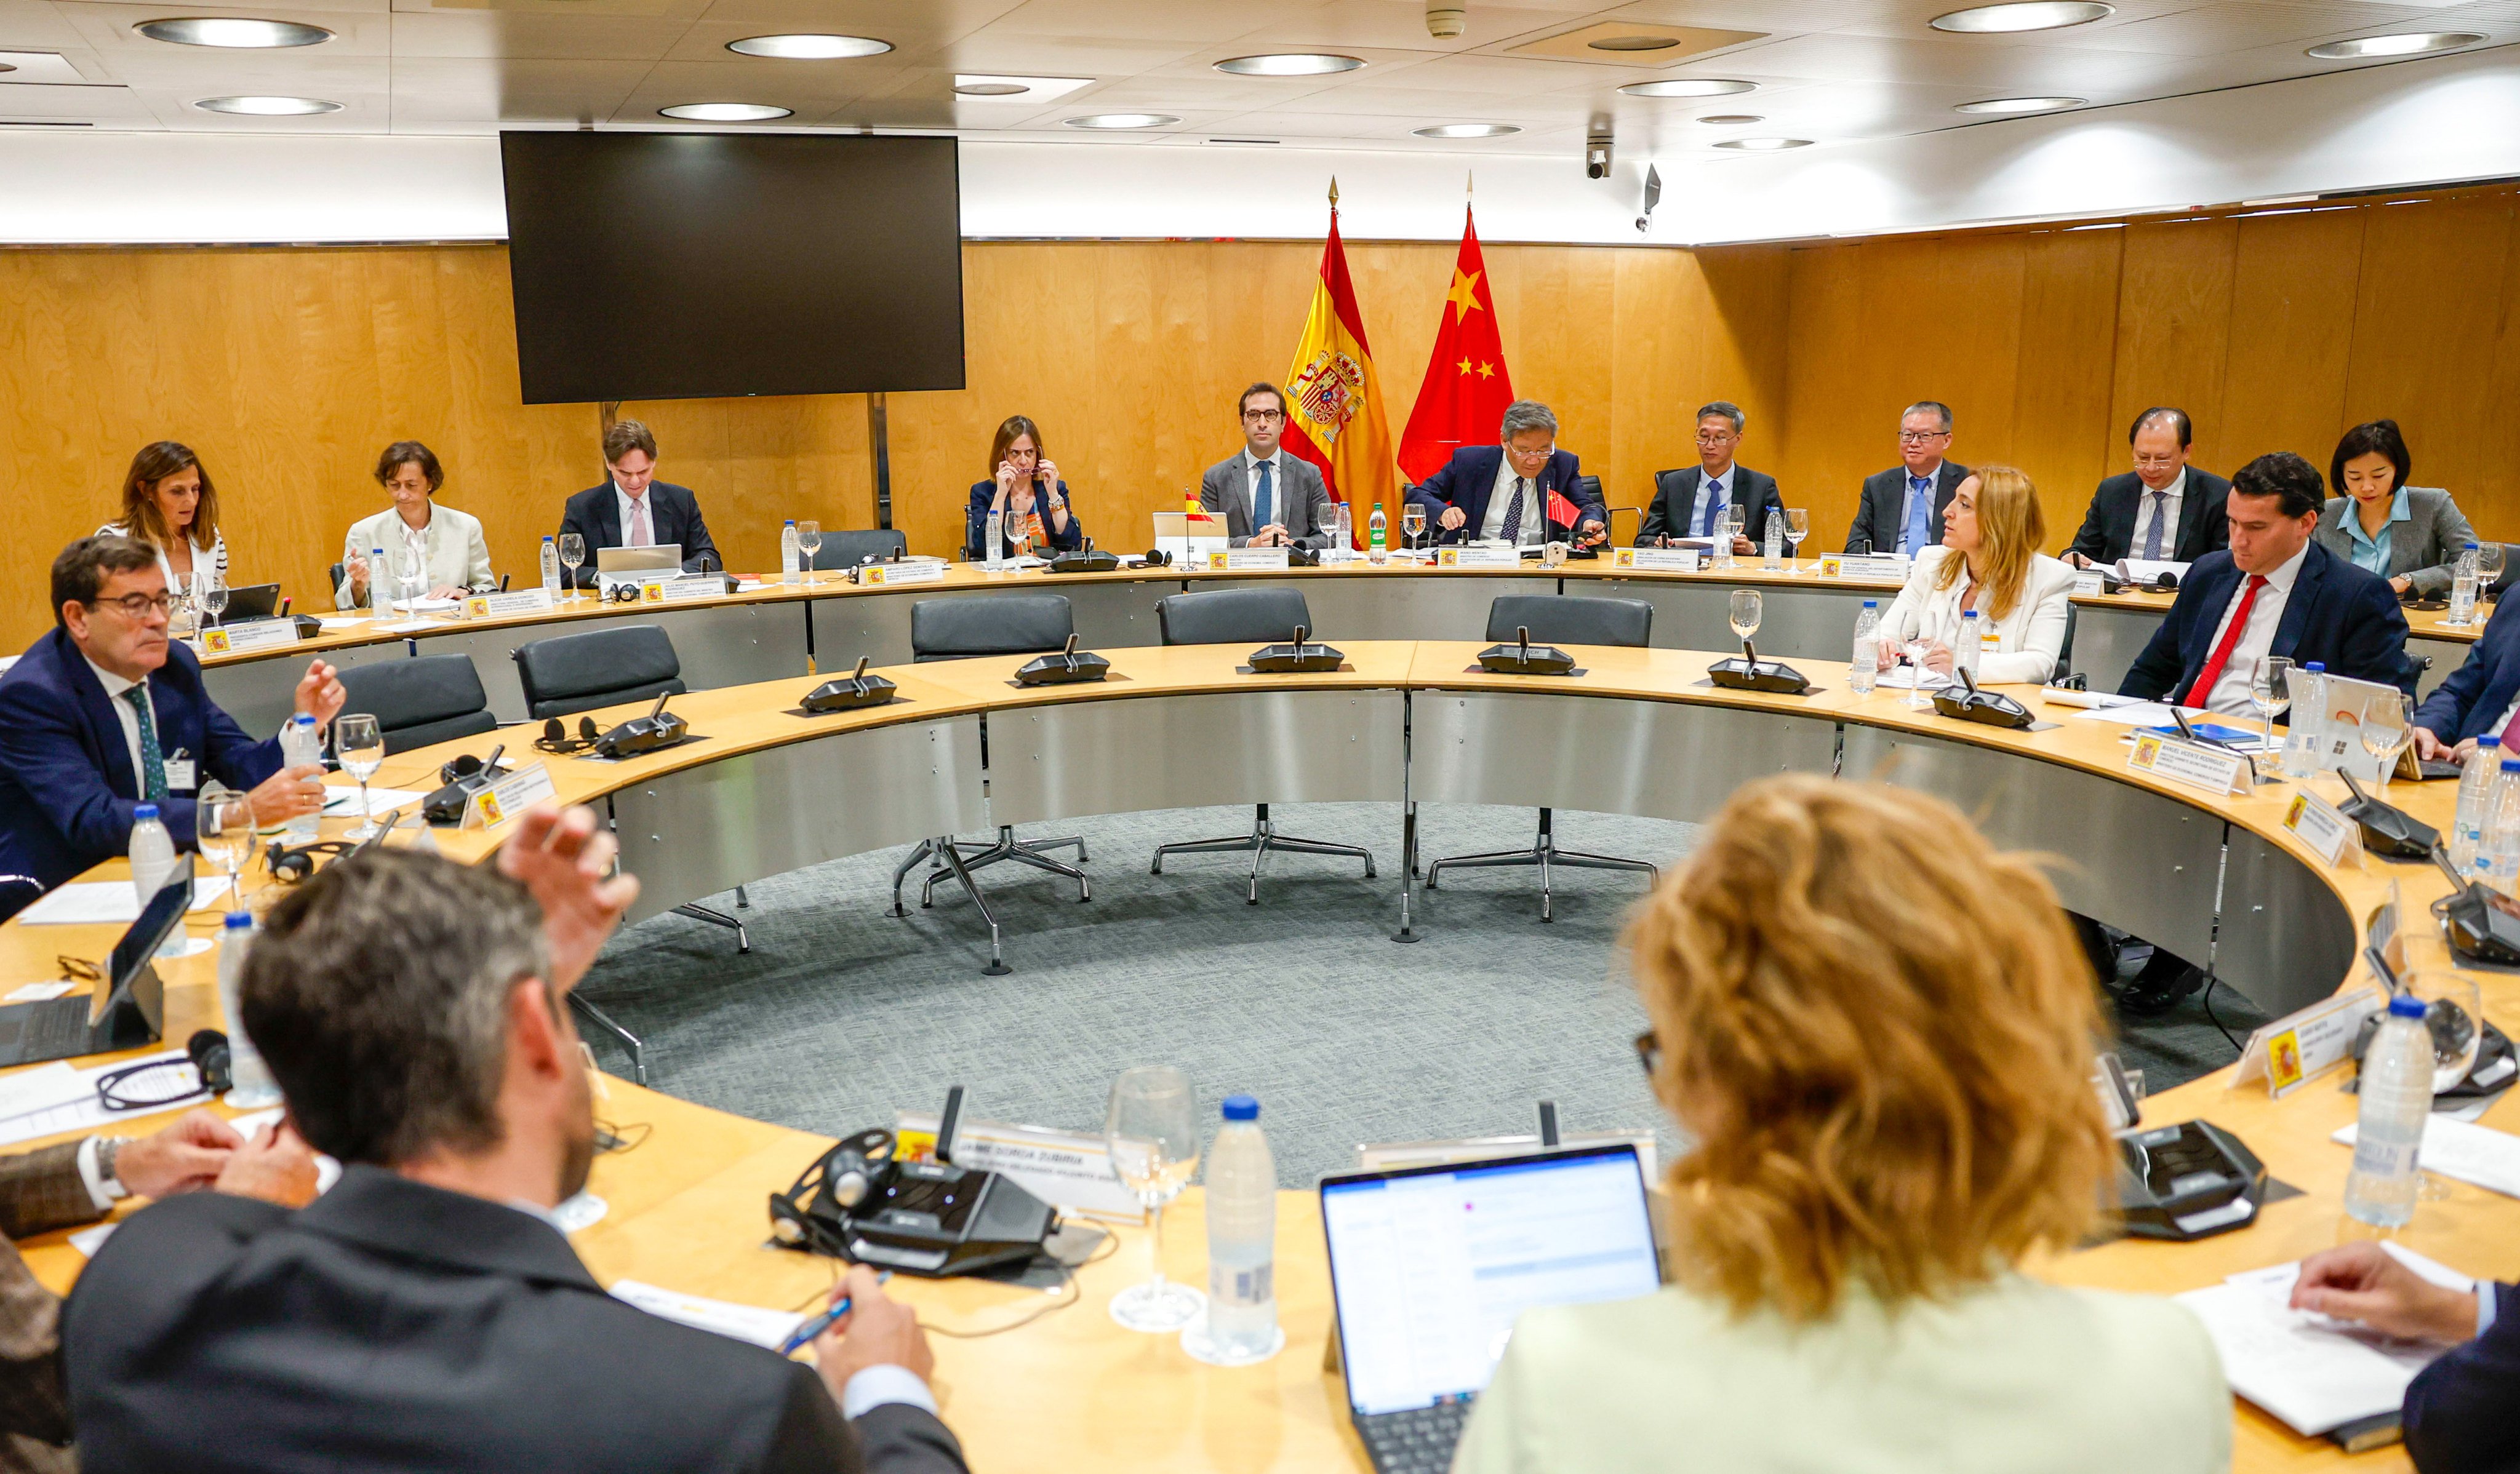 The 29th China-Spain Joint Economic and Industrial Cooperation Committee meeting took place on Monday. Photo: EPA-EFE